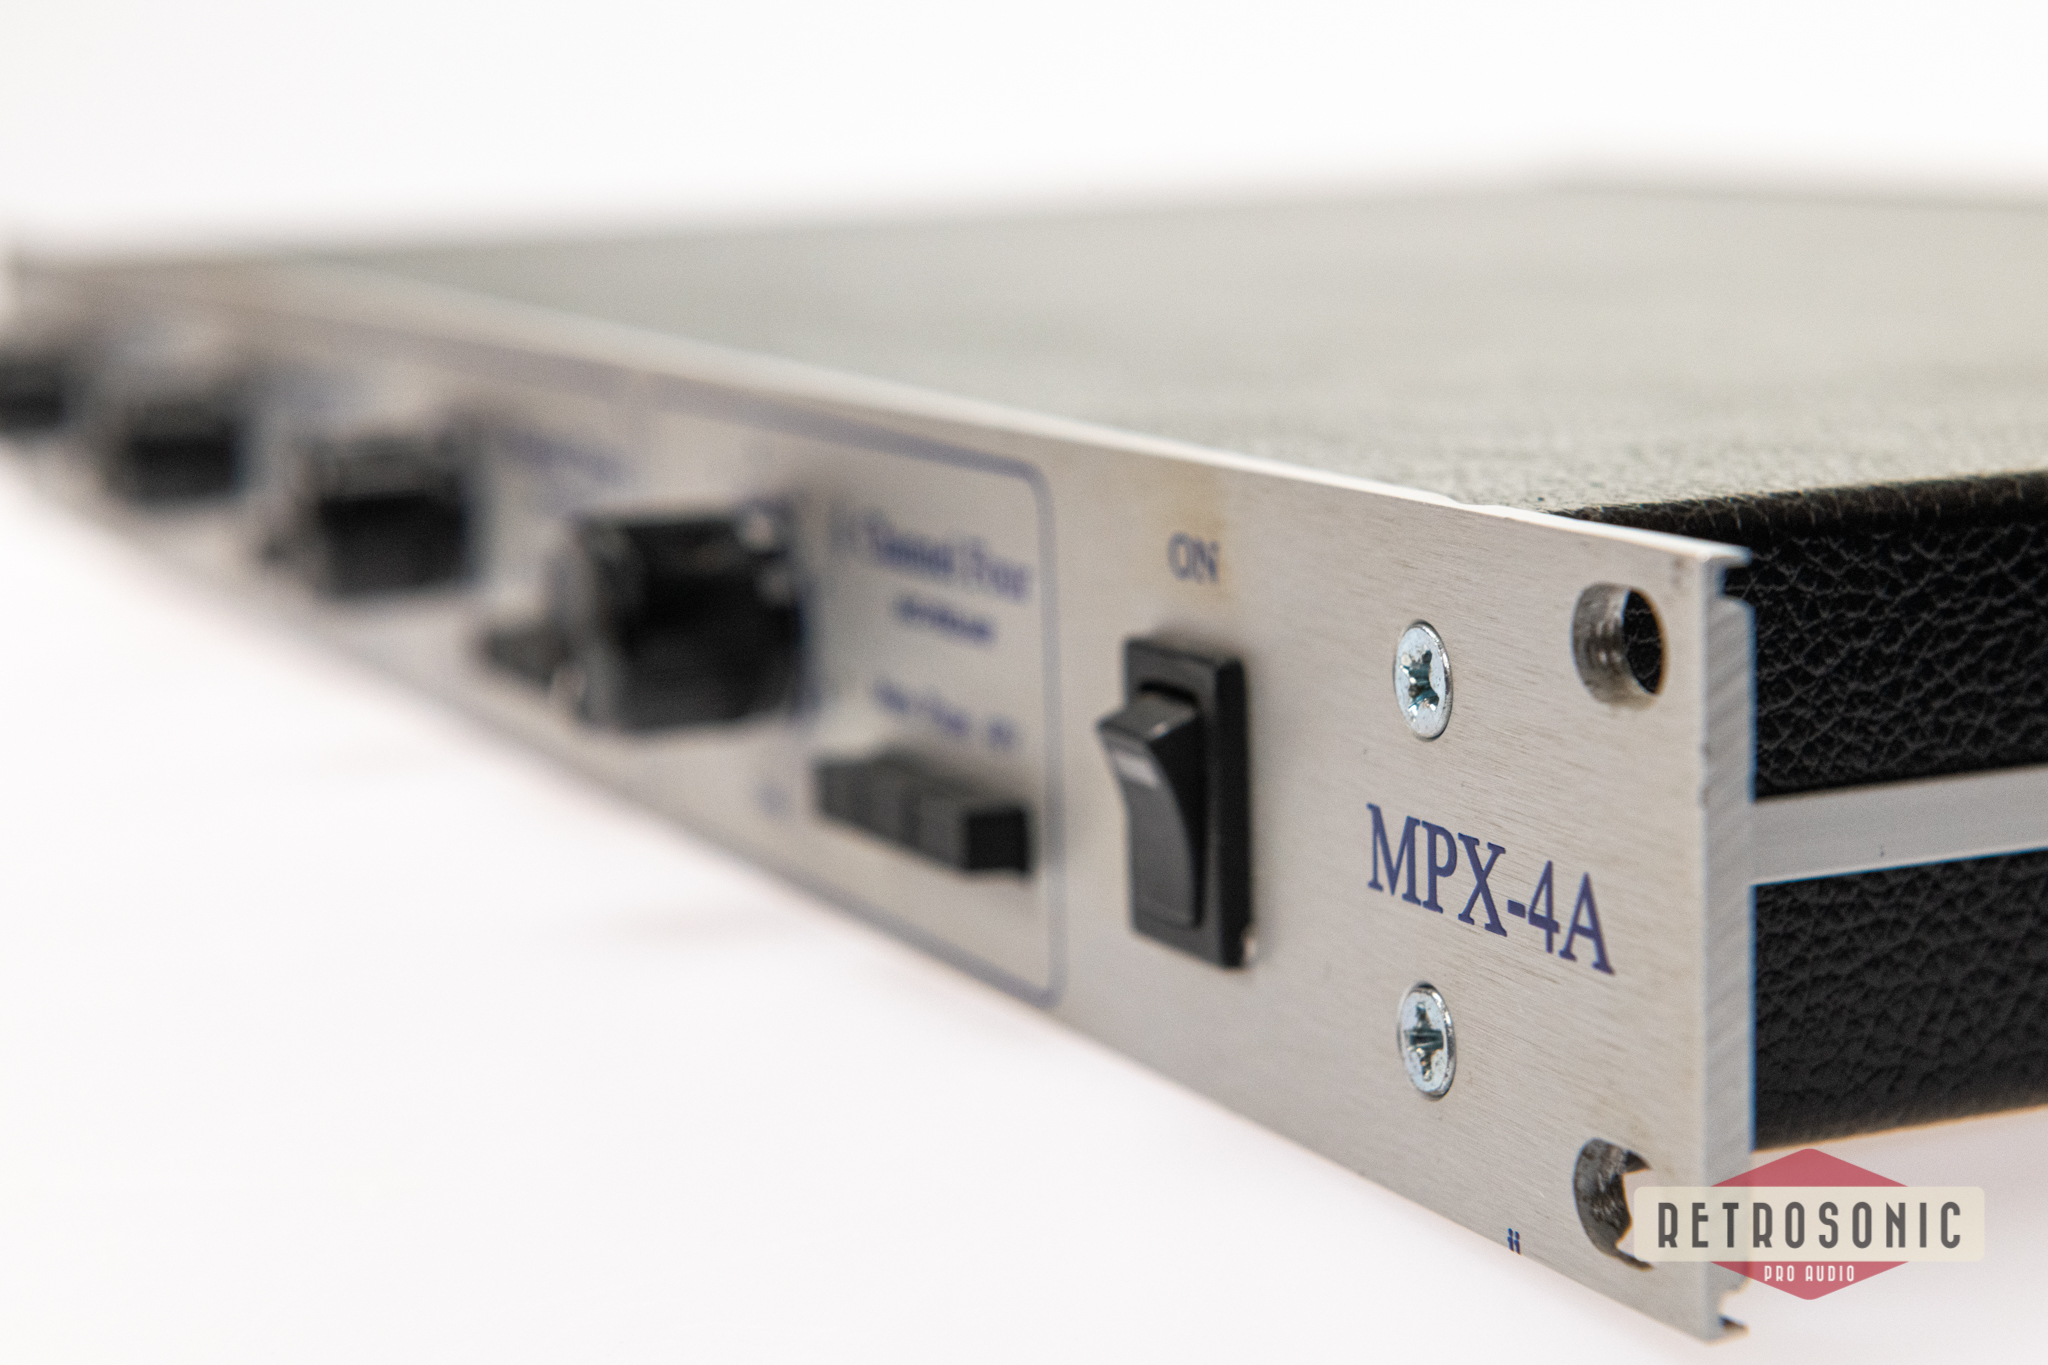 Sytek MPX-4ii 4-Channel Mic Preamp with 2ch Burr-Brown OP-amps